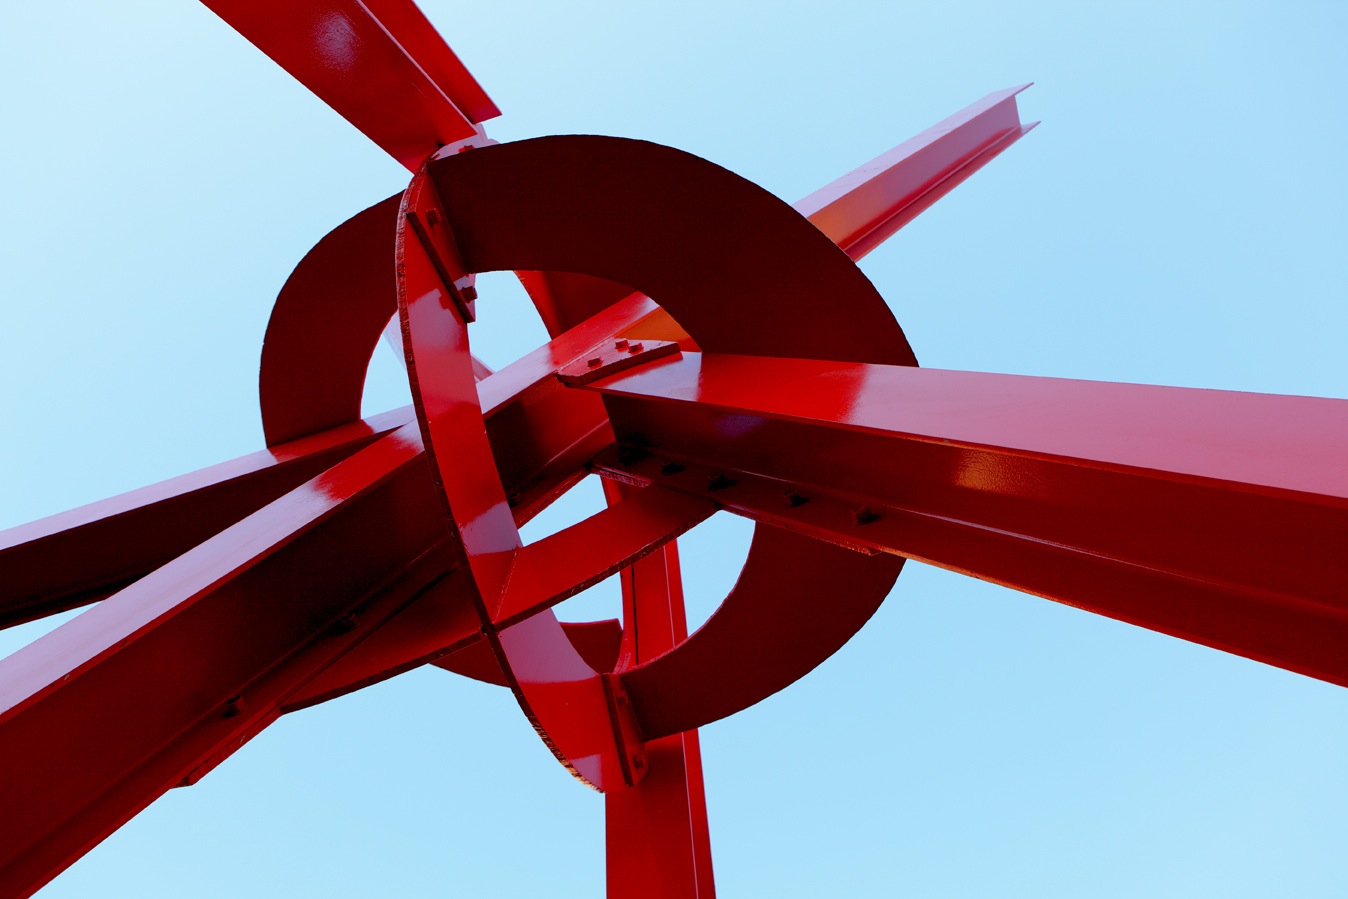 A large red sculpture made out of metal